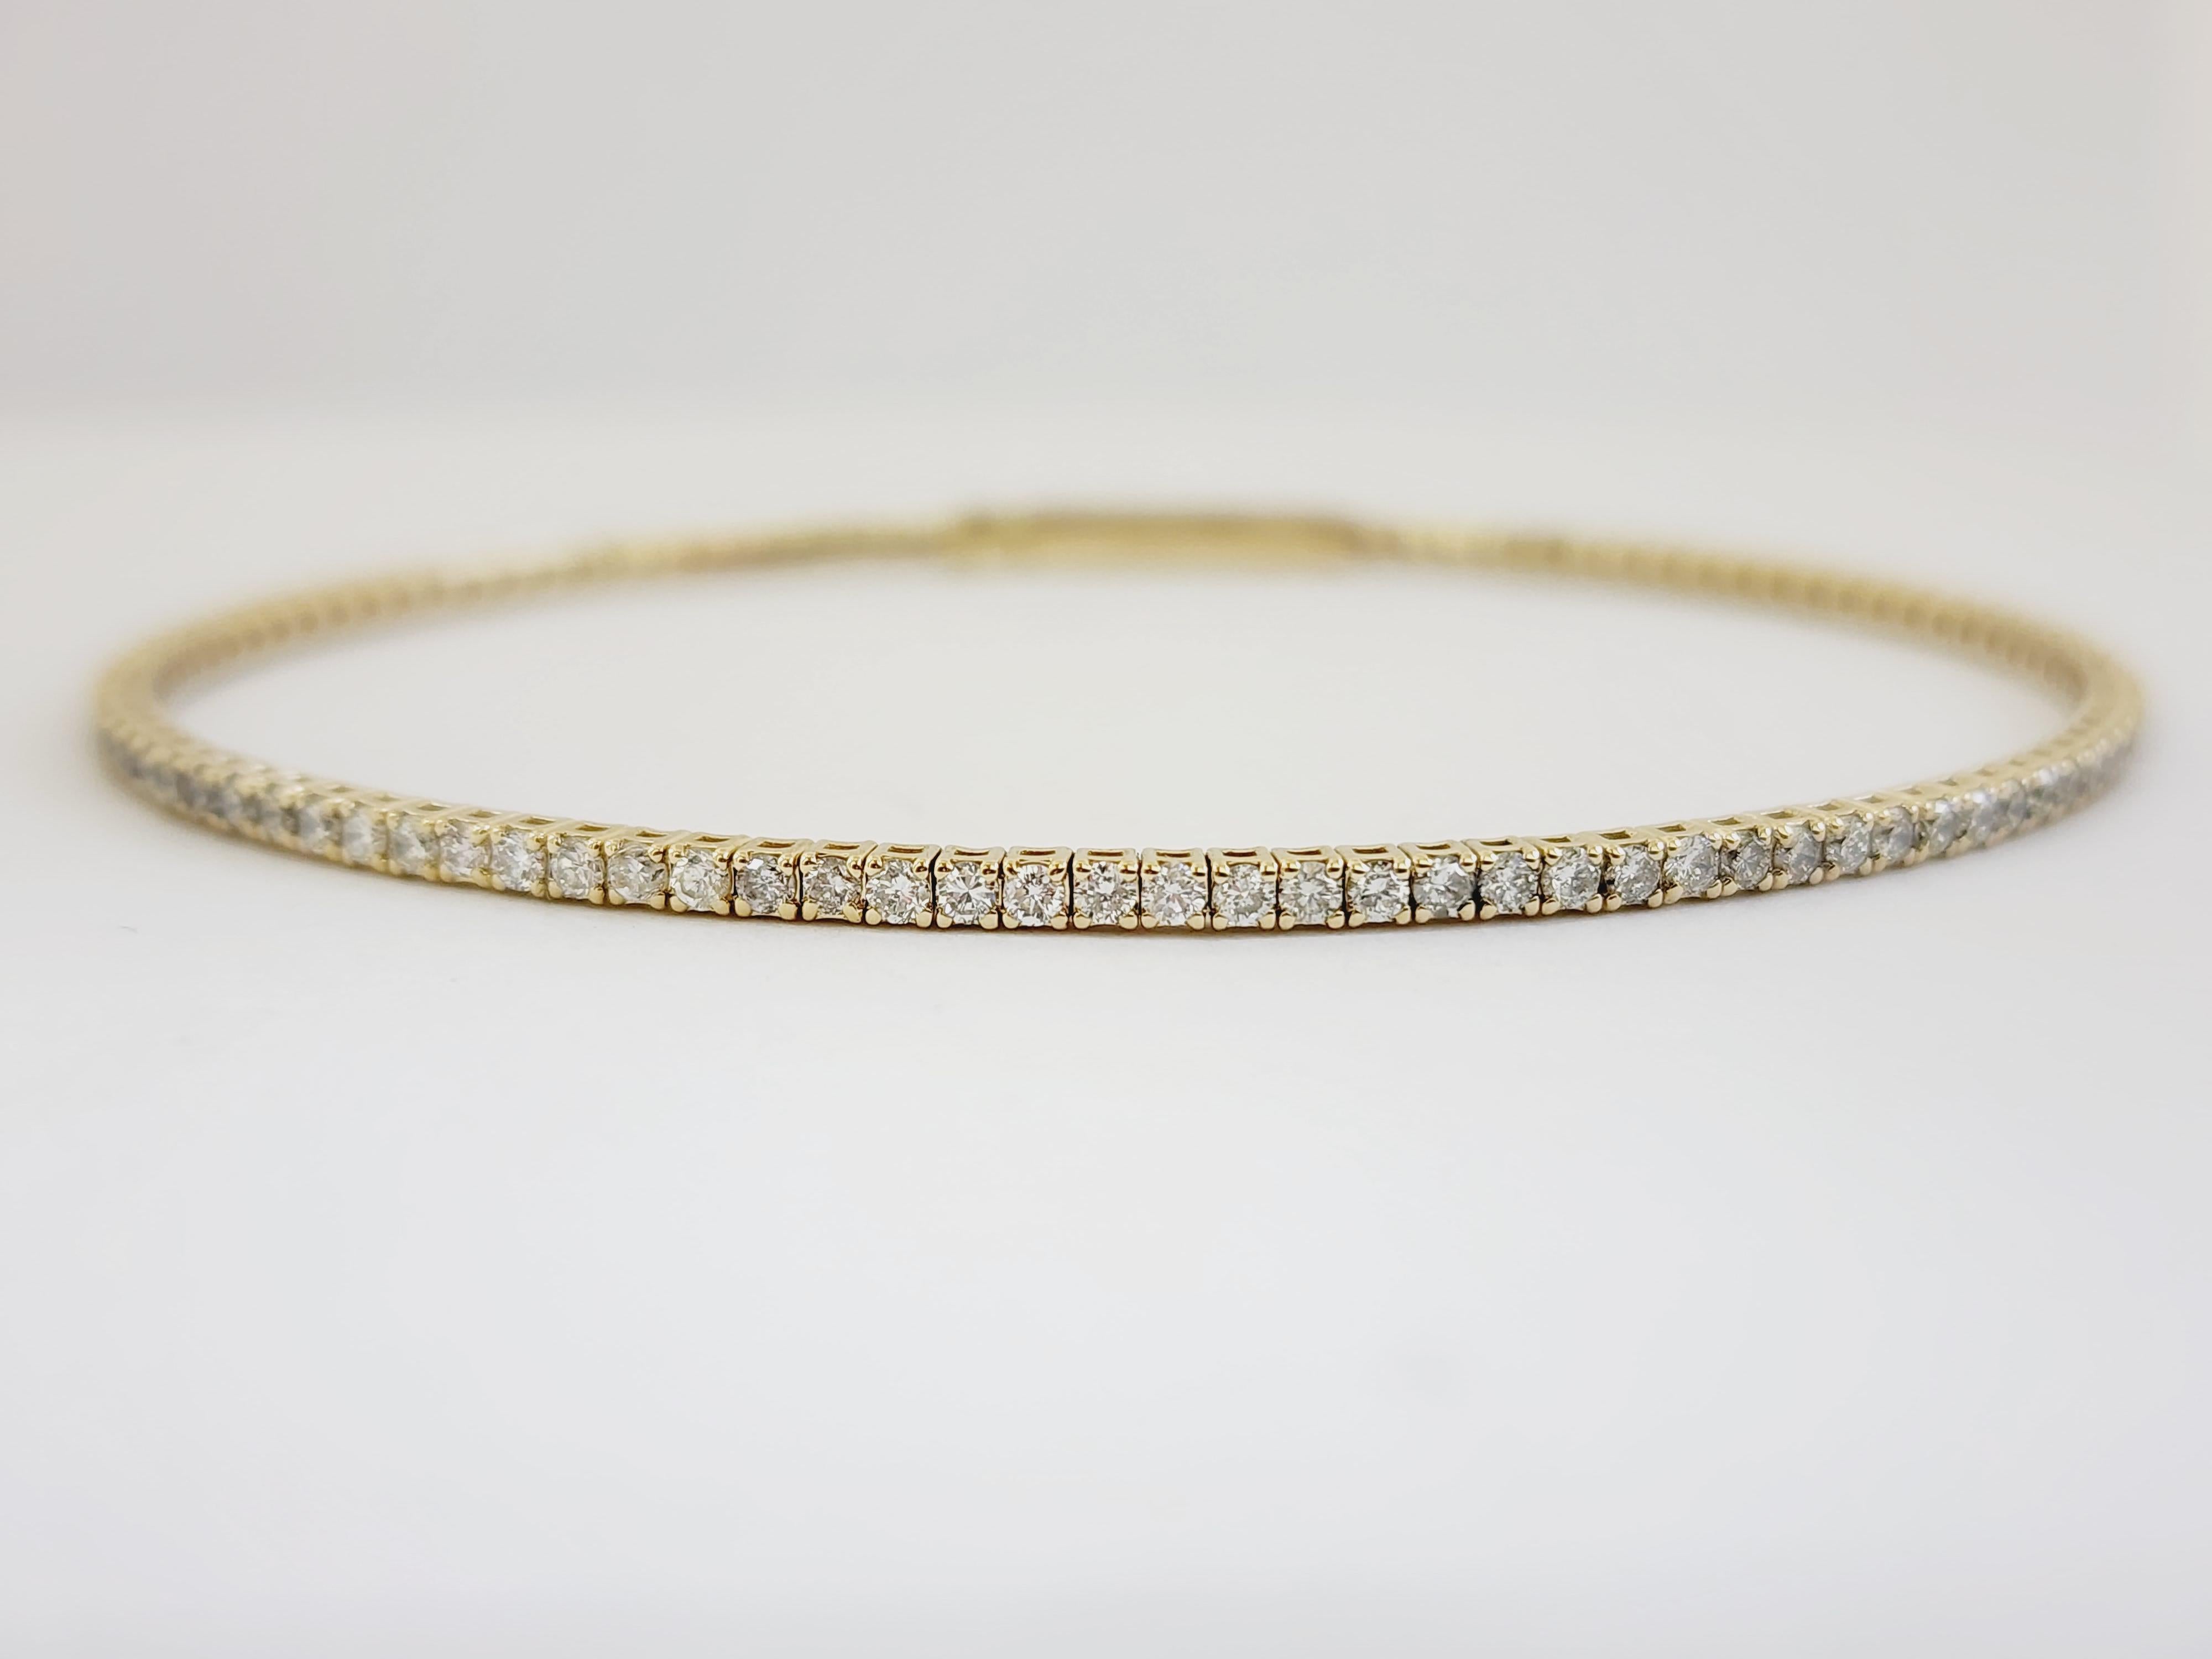 Natural Diamonds 1.51 ctw flexible bangle yellow gold 14k 7 Inch. Average Color H Clarity VS . 1.8 mm wide.